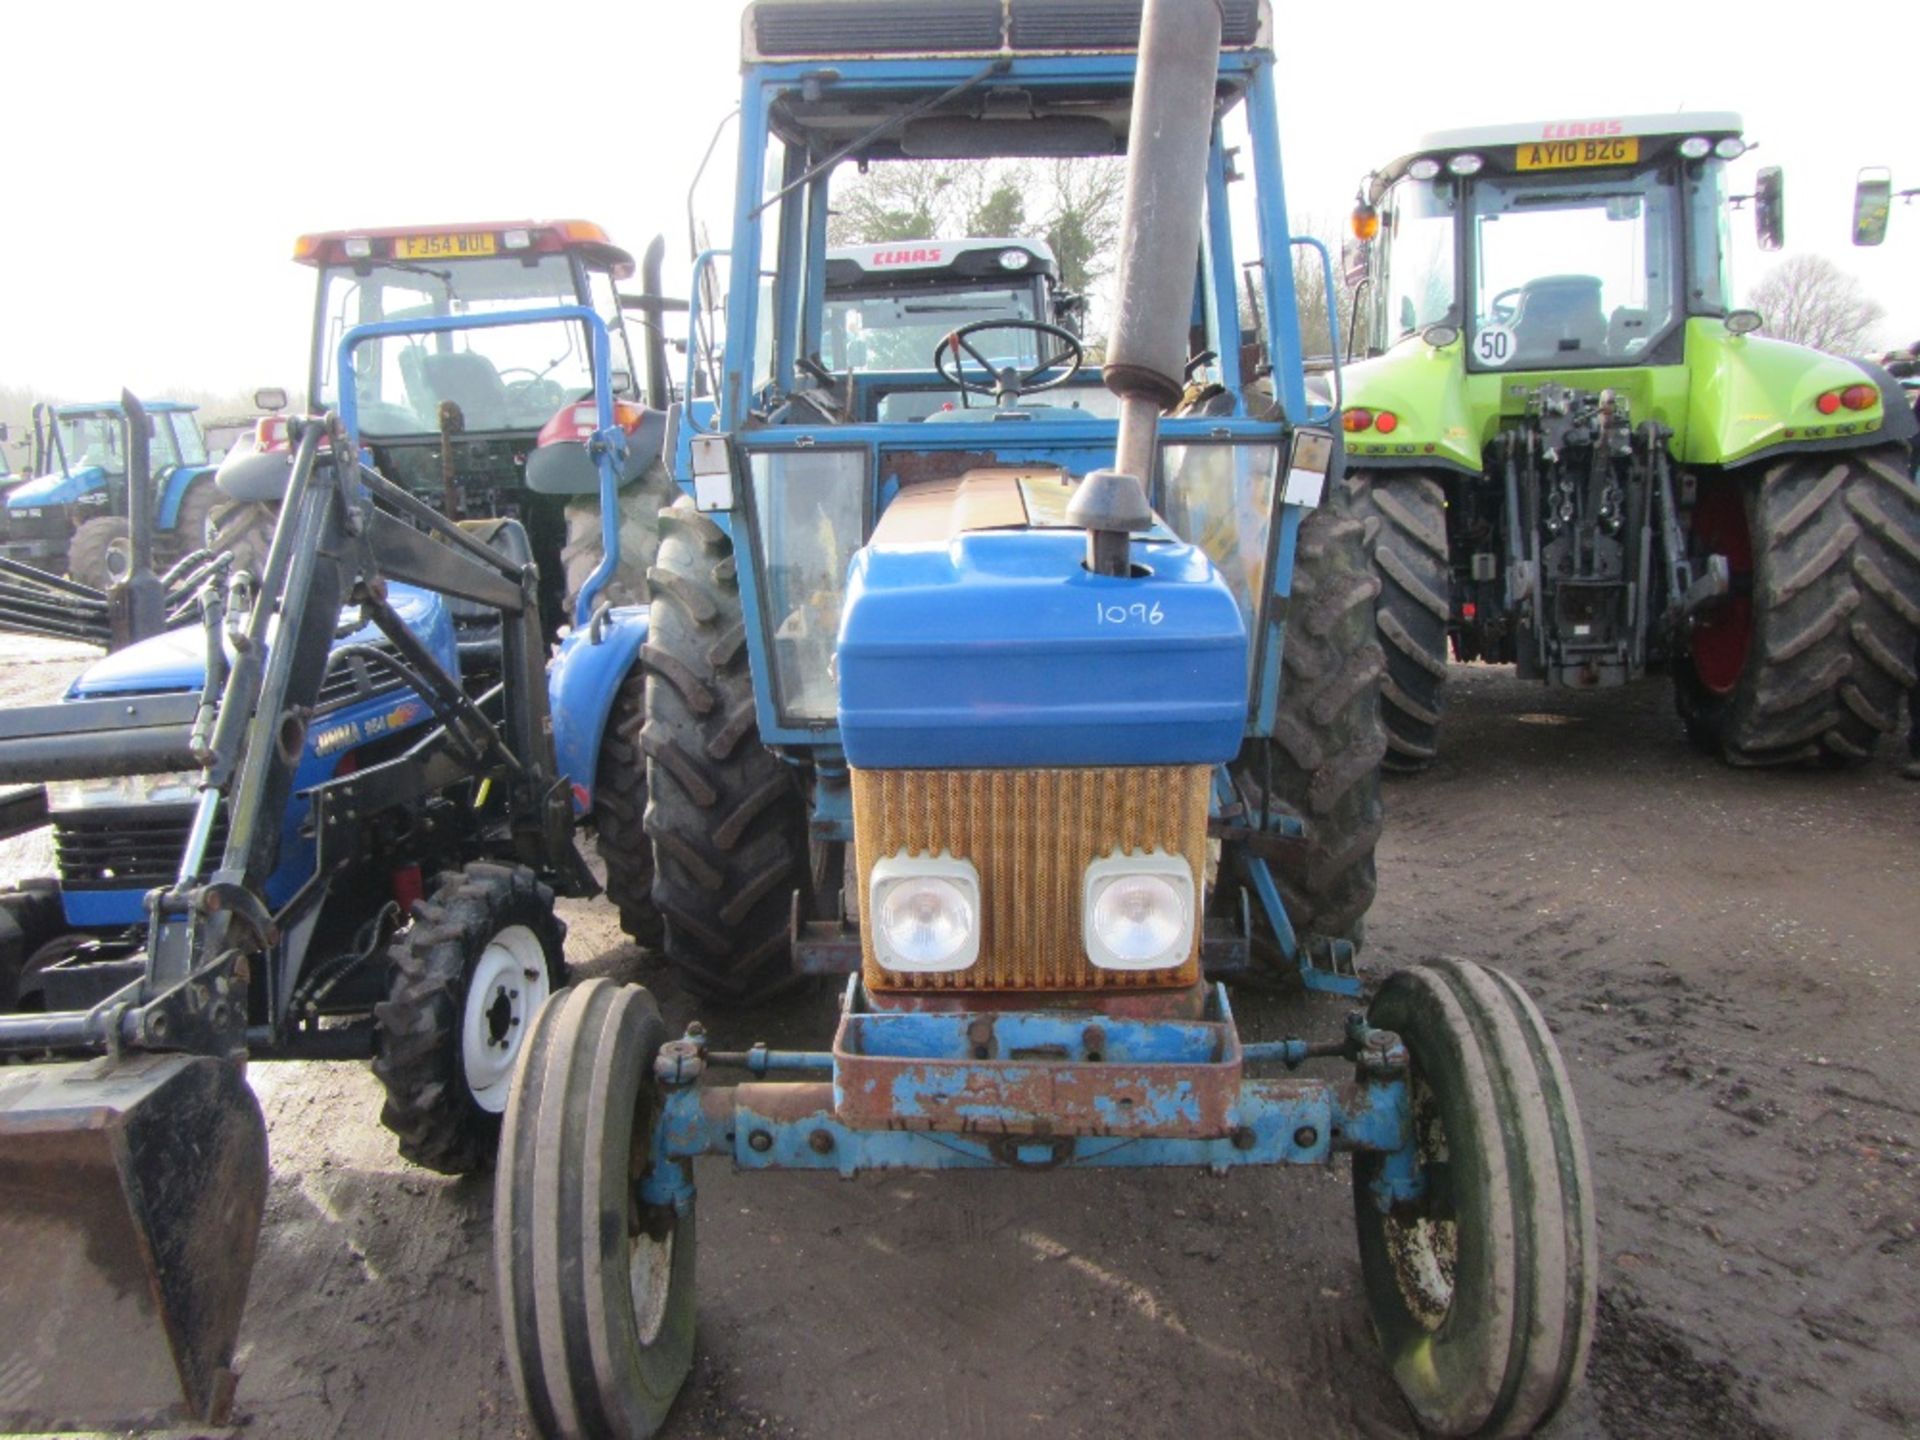 Ford 5610 2wd Tractor c/w Floor Change Gearbox. Reg. No. B621 UOW Ser. No. BA22021 - Image 2 of 10